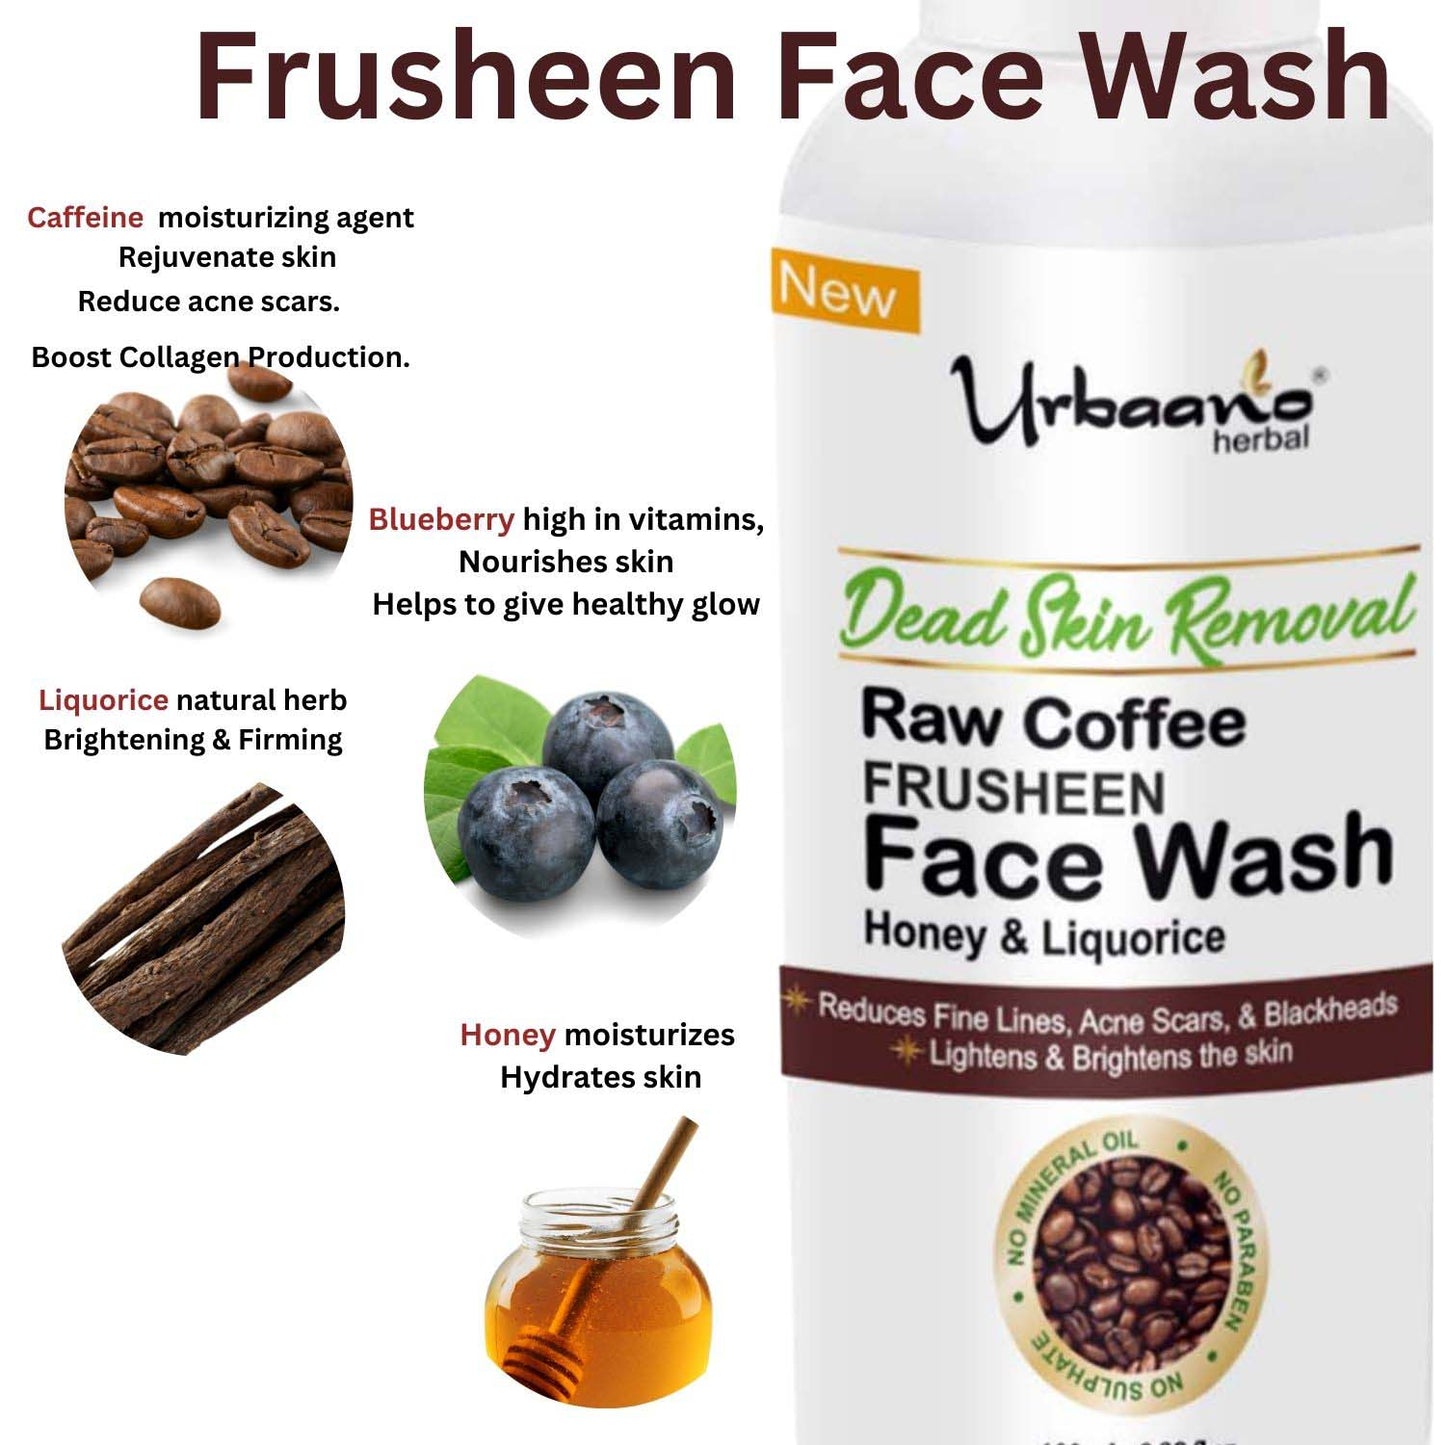 urbaano herbal frusheen sulphate free face wash raw coffee infused with blueberry,caffeine, liquorice for skin lightening, reduce tan, fine lines, hydrates